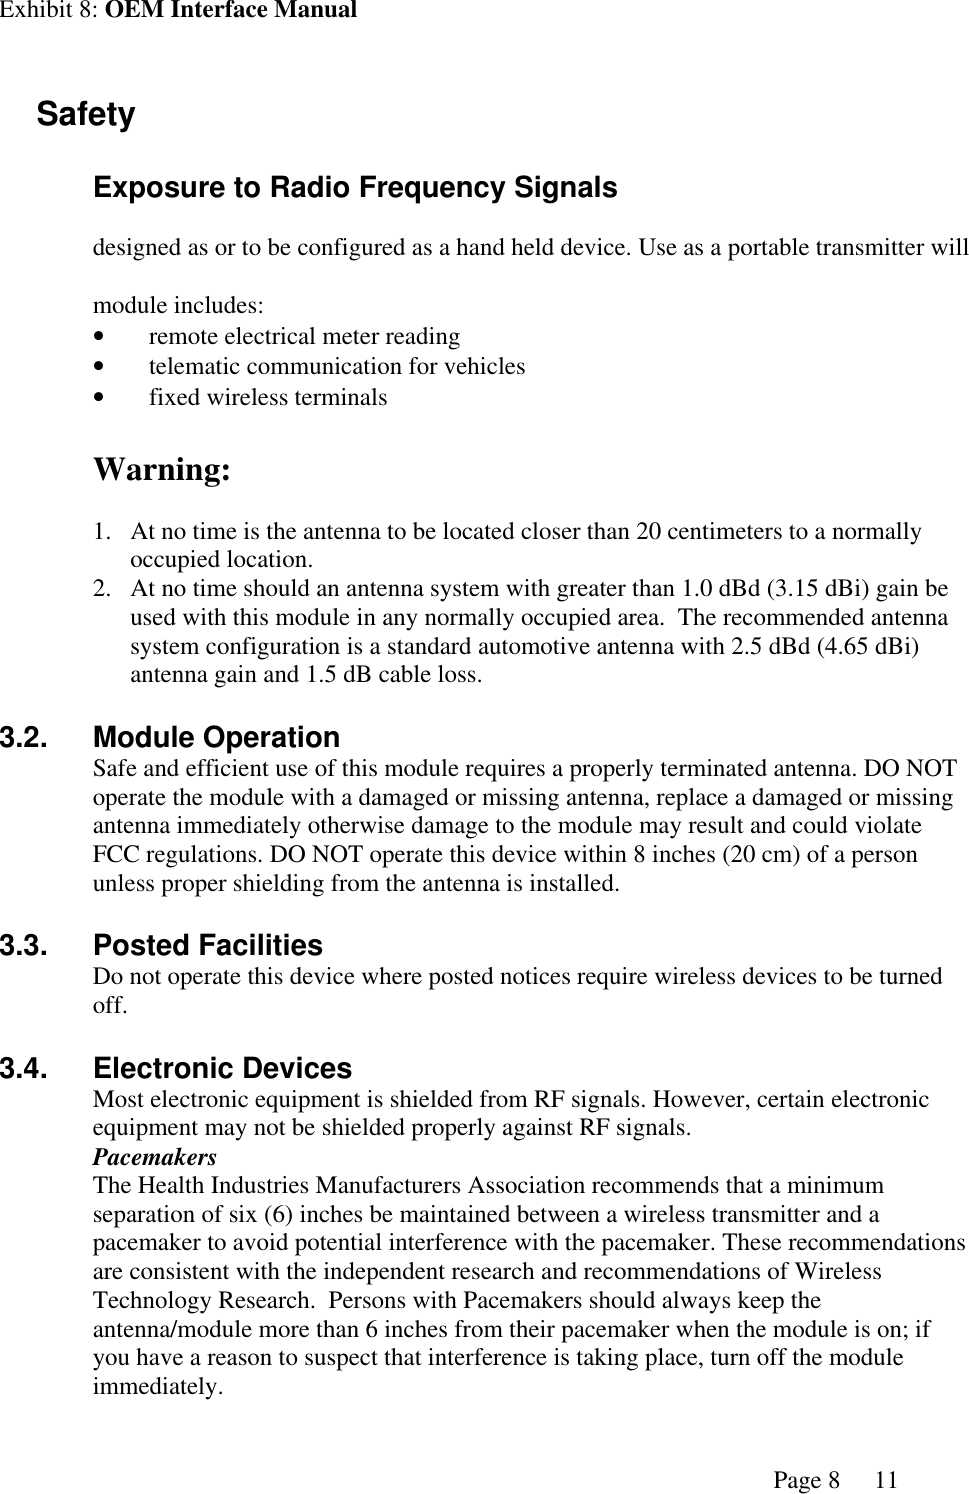 Exhibit 8: OEM Interface ManualPage 8 11 Safety Exposure to Radio Frequency Signalsdesigned as or to be configured as a hand held device. Use as a portable transmitter willmodule includes:•remote electrical meter reading•telematic communication for vehicles•fixed wireless terminalsWarning:1. At no time is the antenna to be located closer than 20 centimeters to a normallyoccupied location.2. At no time should an antenna system with greater than 1.0 dBd (3.15 dBi) gain beused with this module in any normally occupied area.  The recommended antennasystem configuration is a standard automotive antenna with 2.5 dBd (4.65 dBi)antenna gain and 1.5 dB cable loss.3.2. Module OperationSafe and efficient use of this module requires a properly terminated antenna. DO NOToperate the module with a damaged or missing antenna, replace a damaged or missingantenna immediately otherwise damage to the module may result and could violateFCC regulations. DO NOT operate this device within 8 inches (20 cm) of a personunless proper shielding from the antenna is installed.3.3. Posted FacilitiesDo not operate this device where posted notices require wireless devices to be turnedoff.3.4. Electronic DevicesMost electronic equipment is shielded from RF signals. However, certain electronicequipment may not be shielded properly against RF signals.PacemakersThe Health Industries Manufacturers Association recommends that a minimumseparation of six (6) inches be maintained between a wireless transmitter and apacemaker to avoid potential interference with the pacemaker. These recommendationsare consistent with the independent research and recommendations of WirelessTechnology Research.  Persons with Pacemakers should always keep theantenna/module more than 6 inches from their pacemaker when the module is on; ifyou have a reason to suspect that interference is taking place, turn off the moduleimmediately.